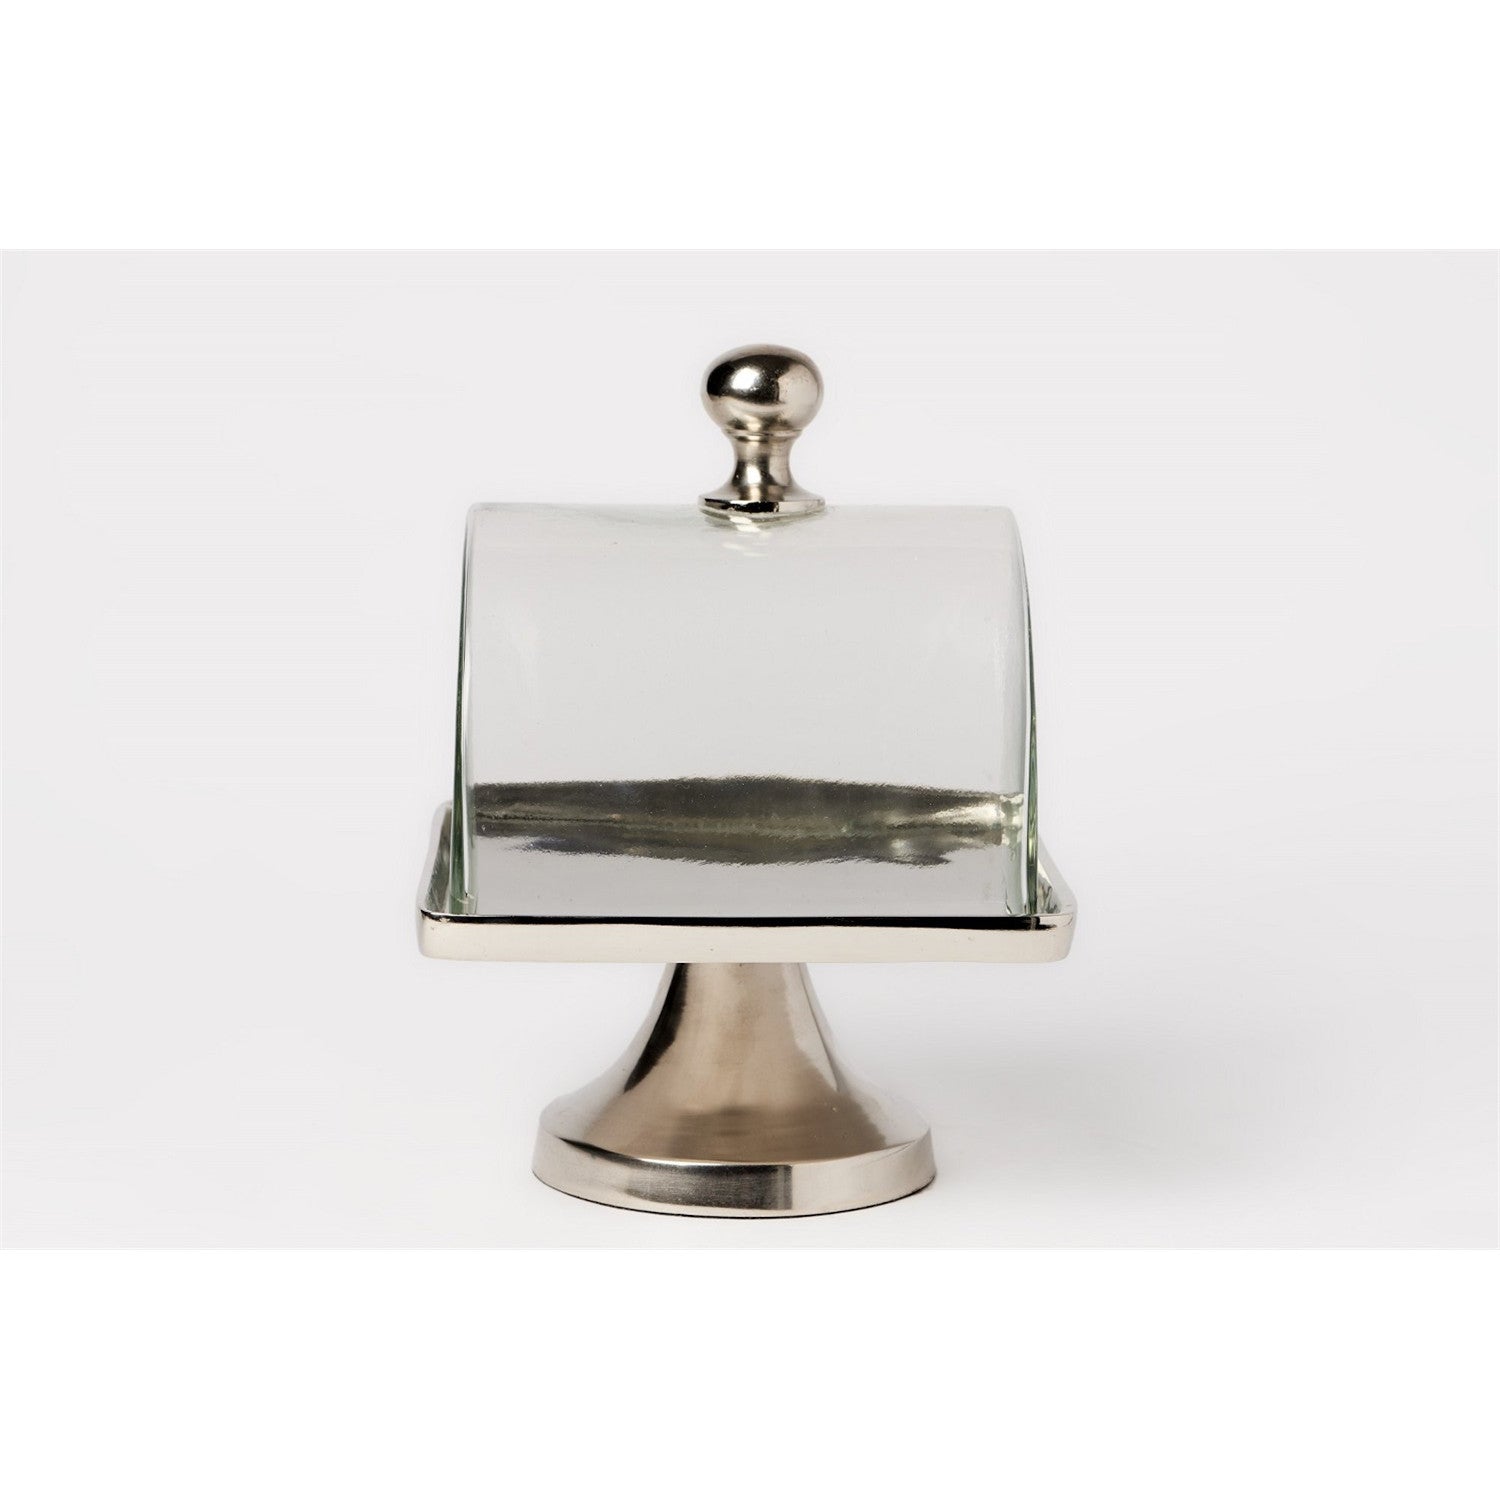 A Hester &amp; Cook Aluminum and Glass Serving Stand &amp; Dome, perfect for showcasing special items.